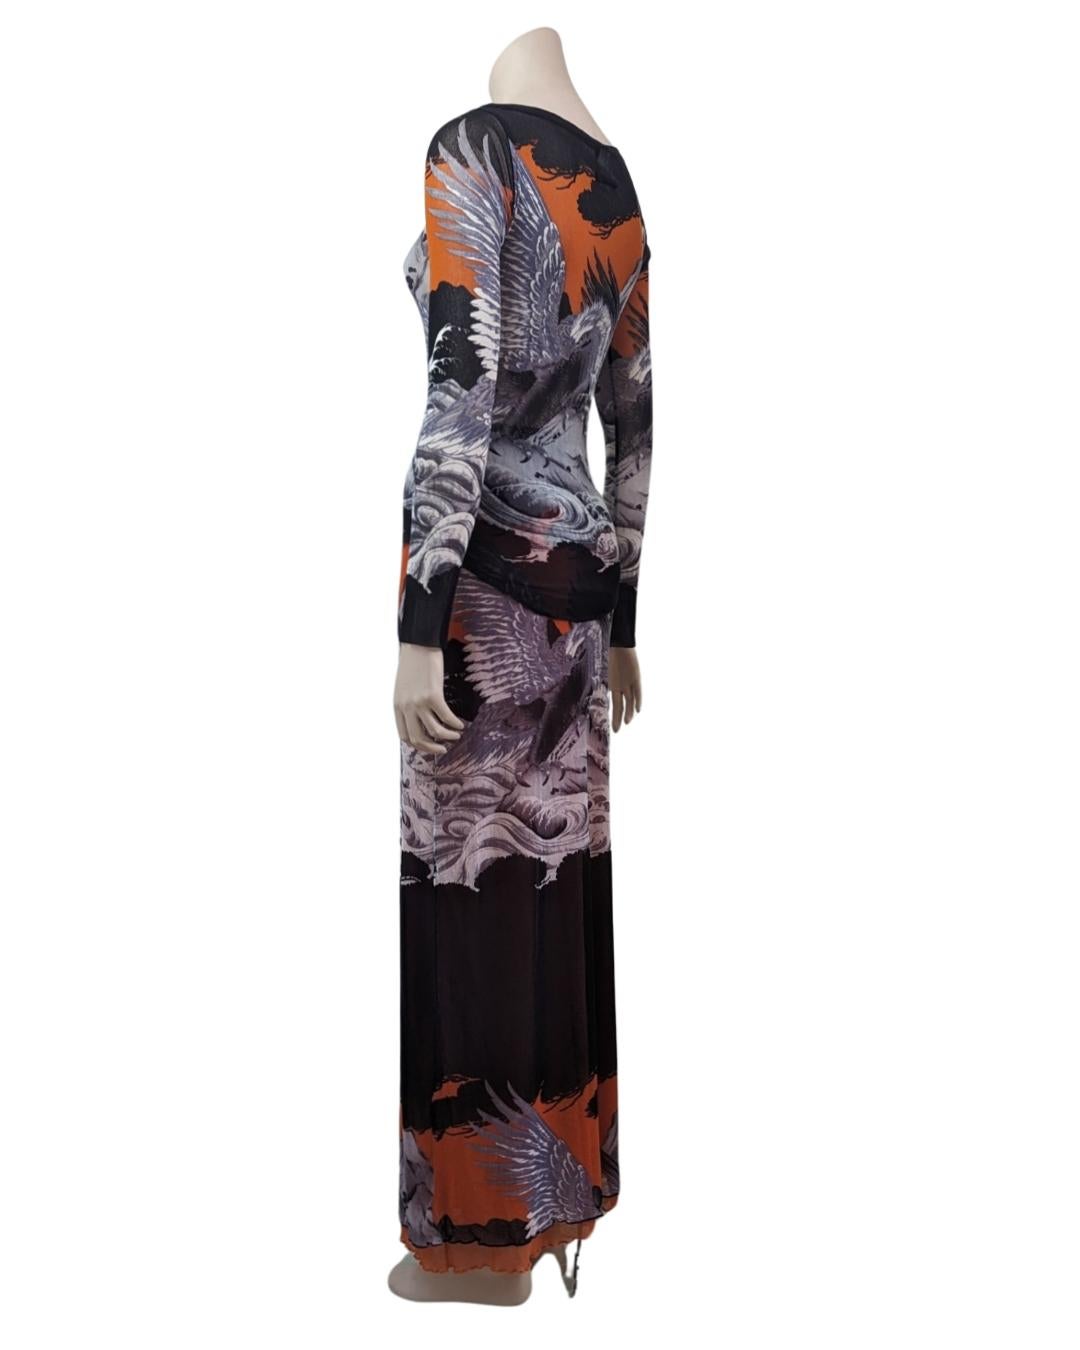 By Jean Paul Gaultier from the Soleil line. Two pieces set featuring a silver eagle and waves with vibrant orange sky tattoo print. Circa 1990s.

· Long sleeves 
· boat neckline
. Mesh
. Maxi Skirt
. Skirt has a double layer of mesh fabric
 

Size